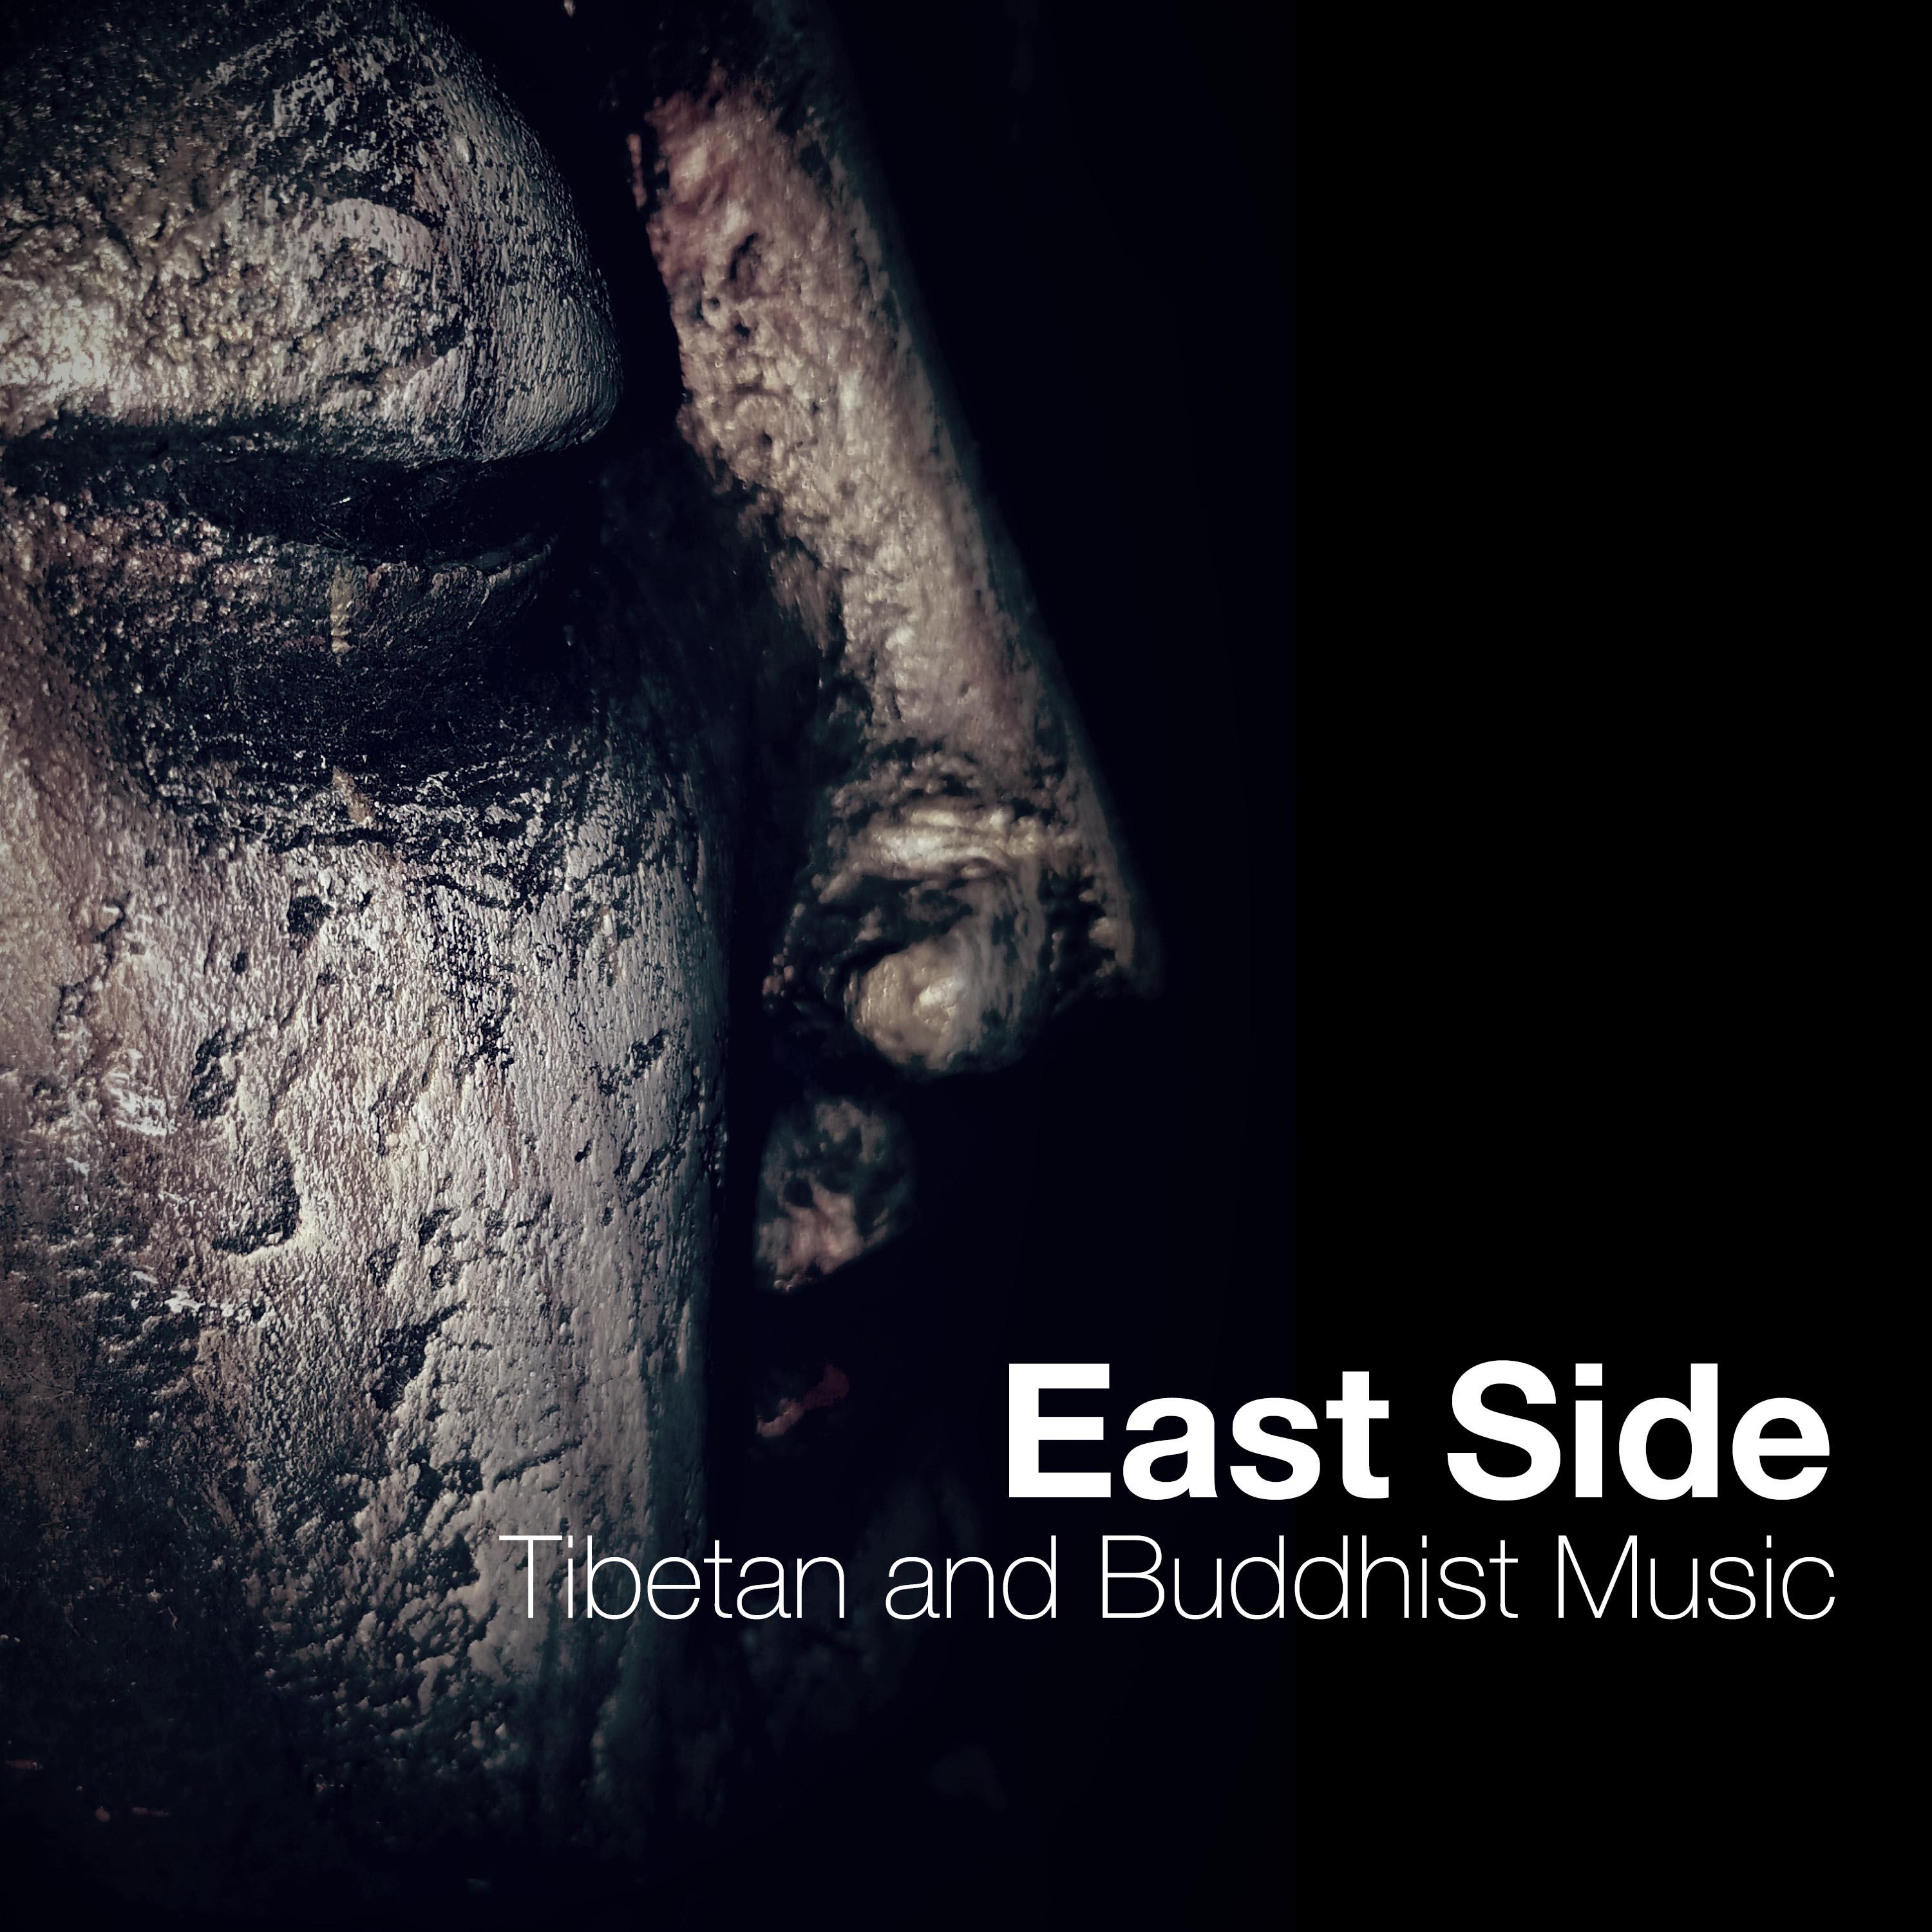 East Side: a Collection of the Best Tibetan and Buddhist Music, Don't Stop the Relaxation